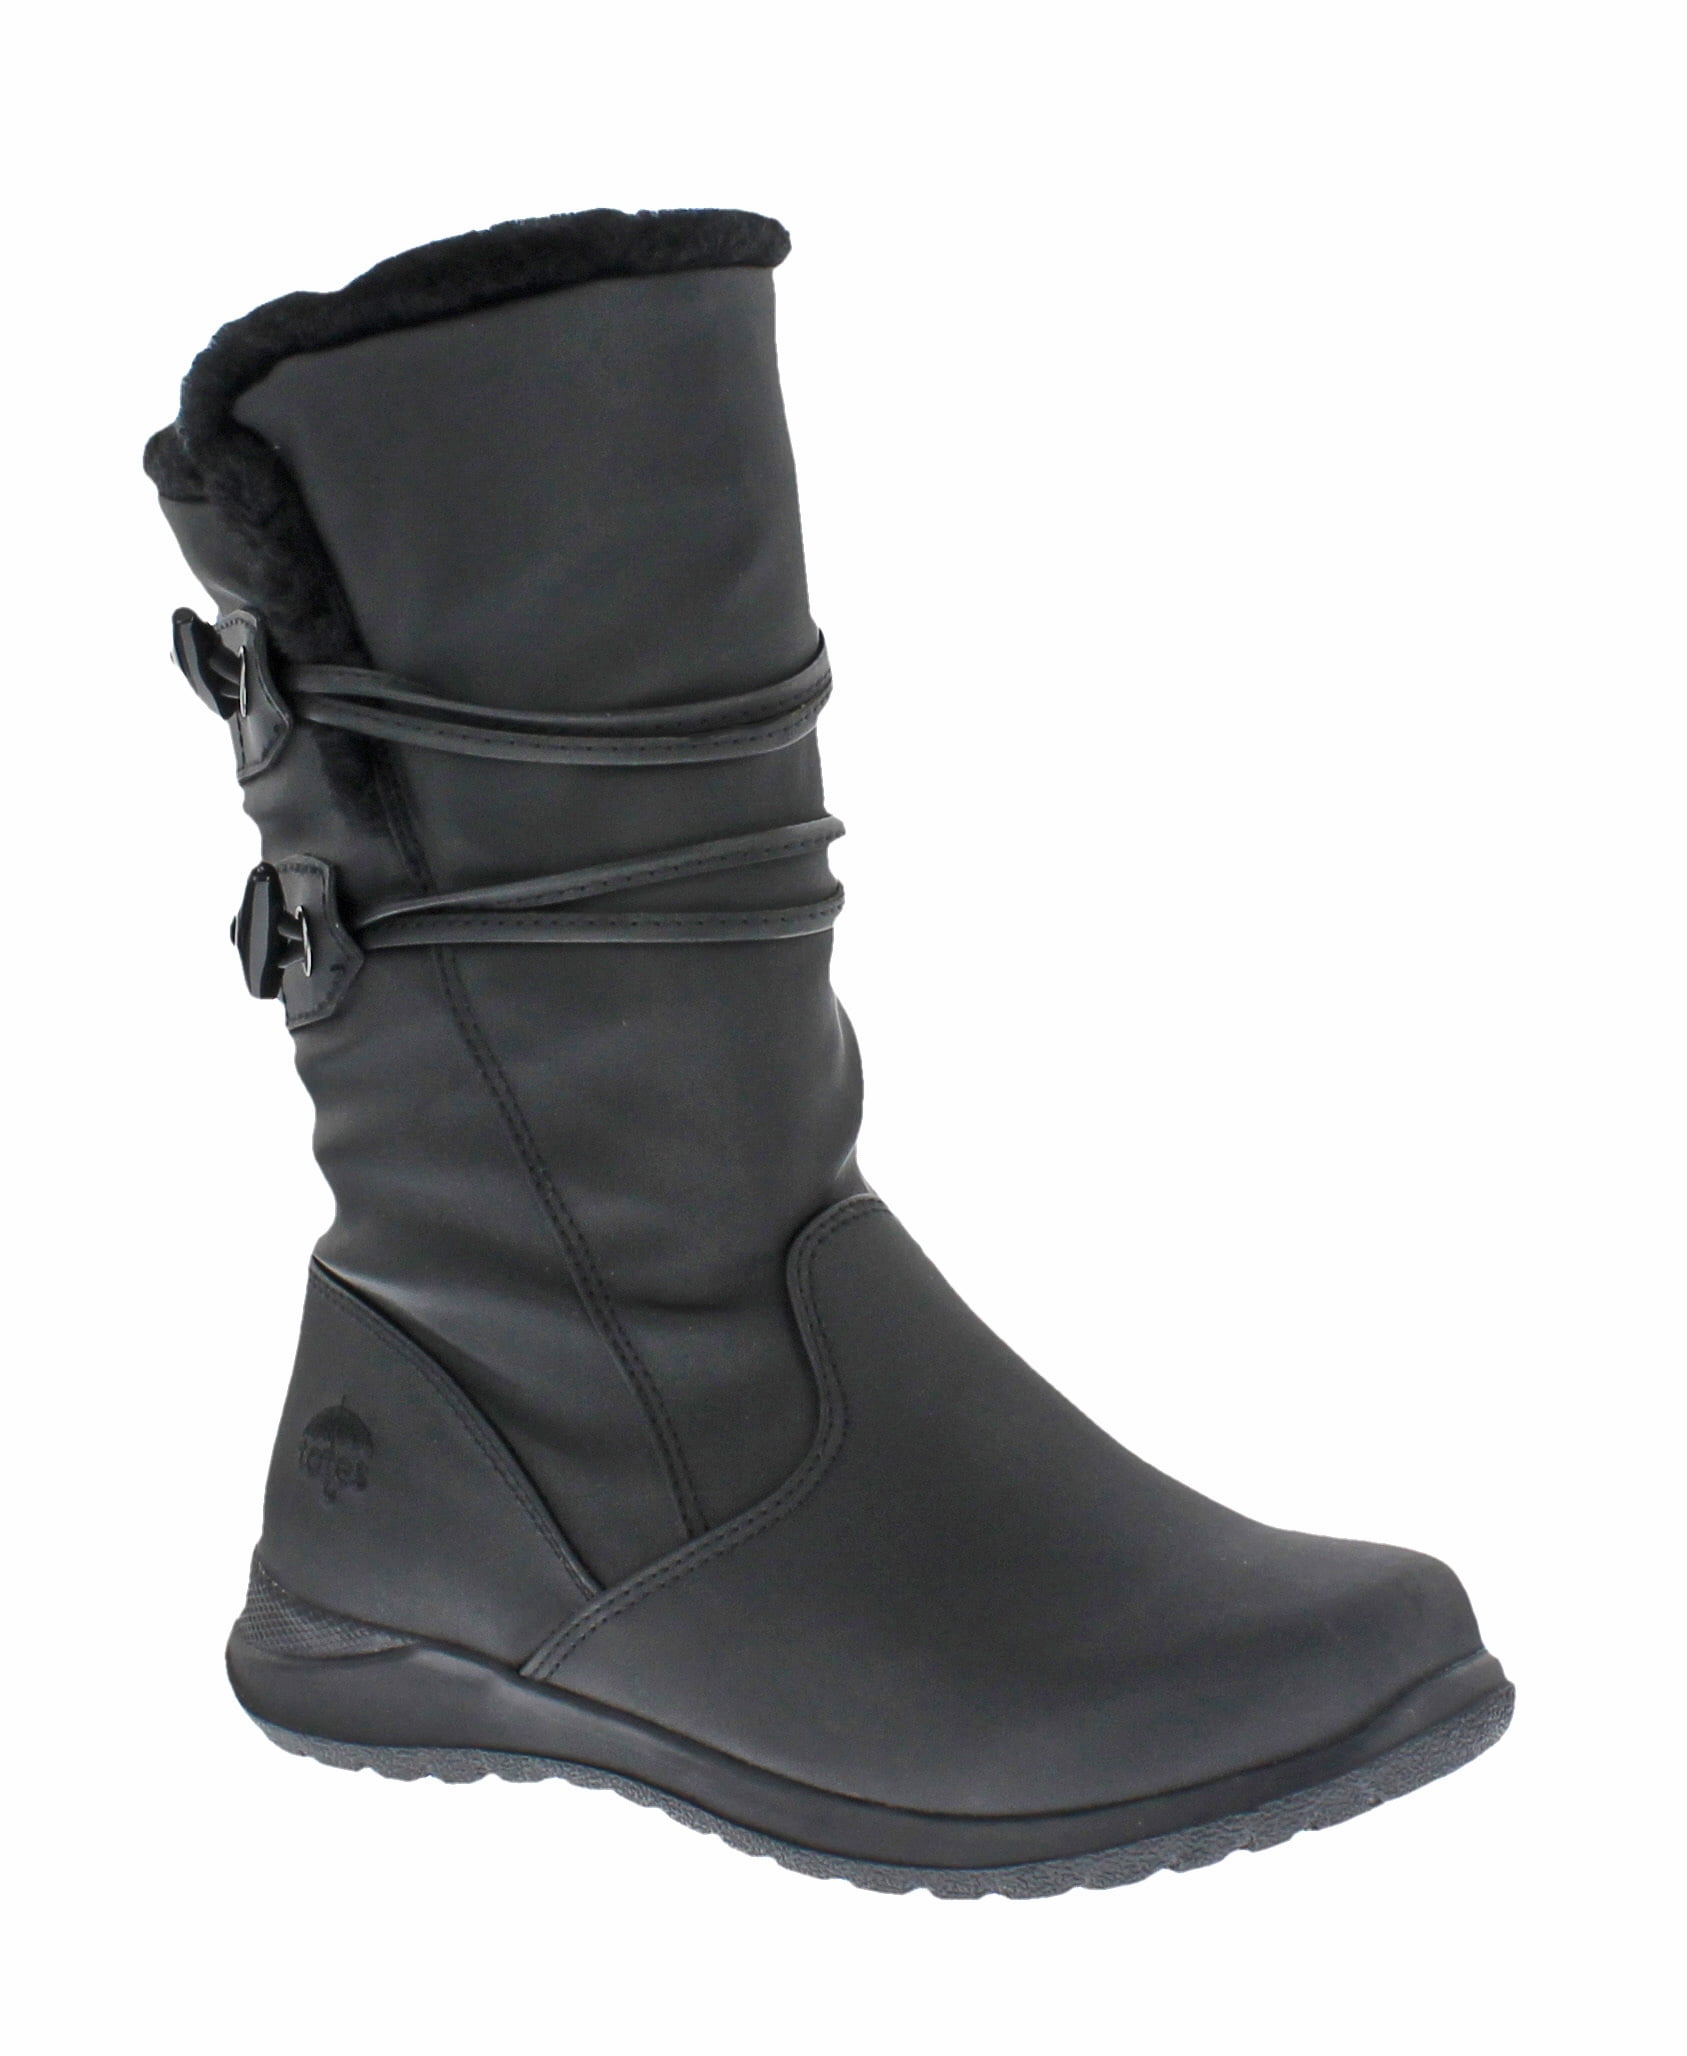 totes - Totes Women's Judy Winter Boot 